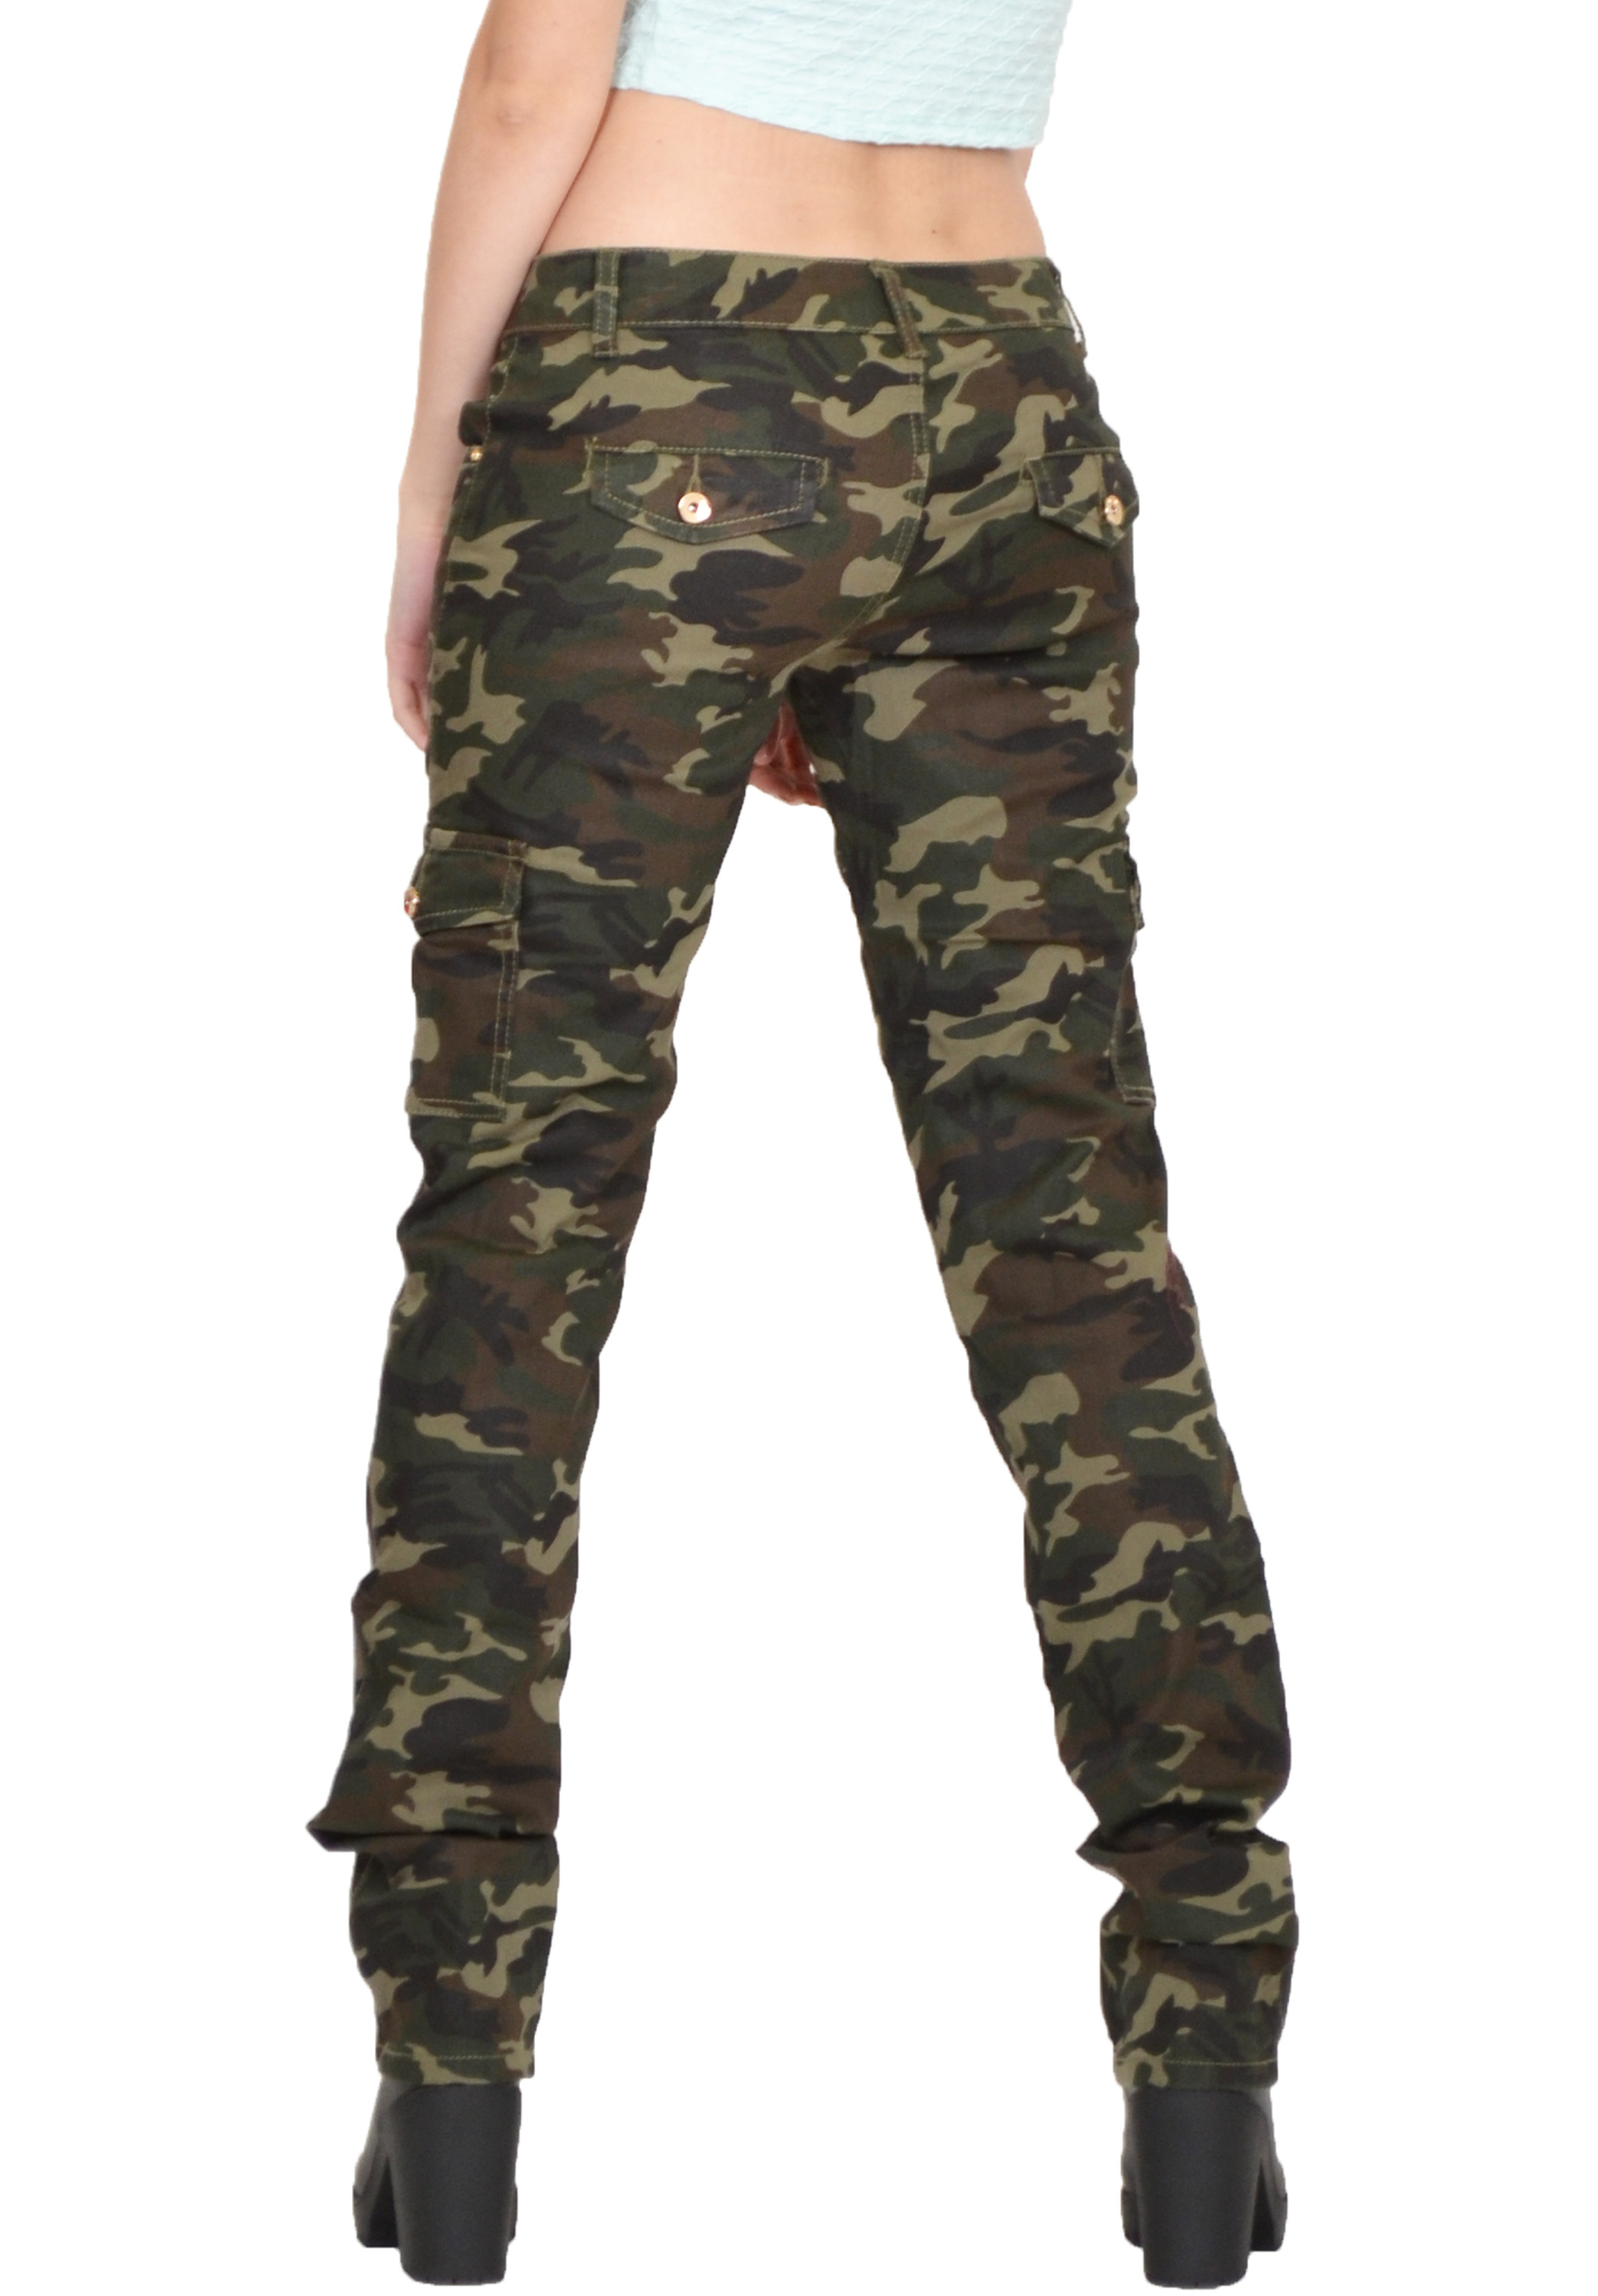 Womens Army Military Green Camouflage Slim Fit Combat Trousers Cargo Pants Jeans Ebay